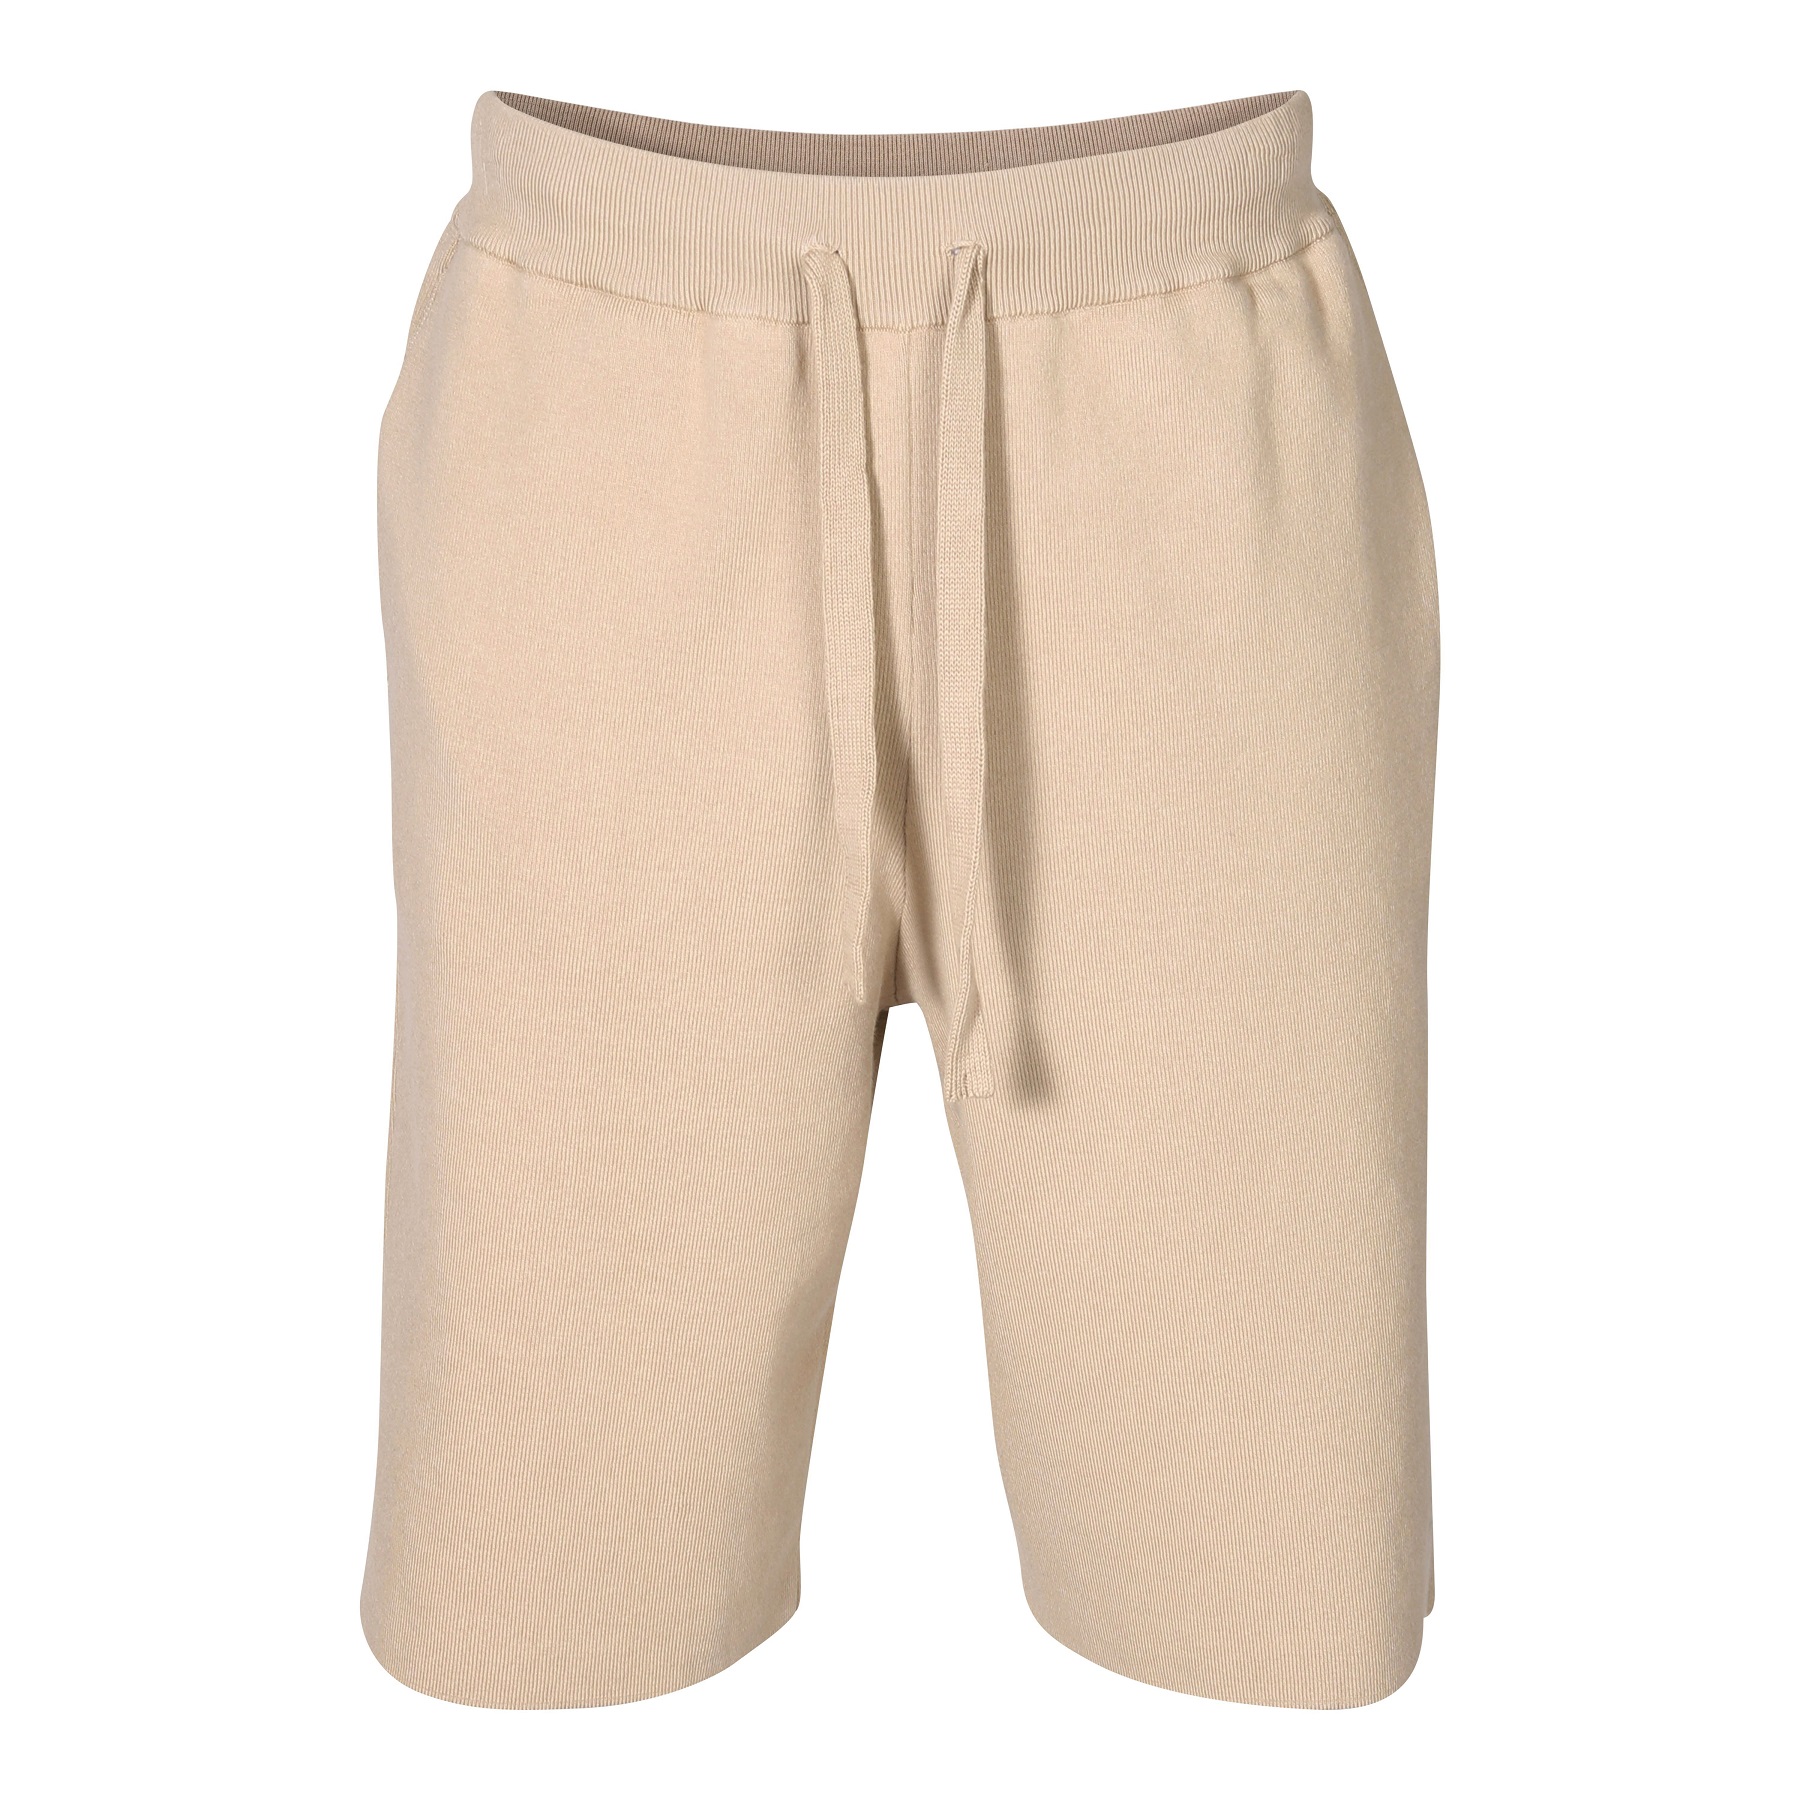 ROBERTO COLLINA Cotton Knit Shorts in Beige